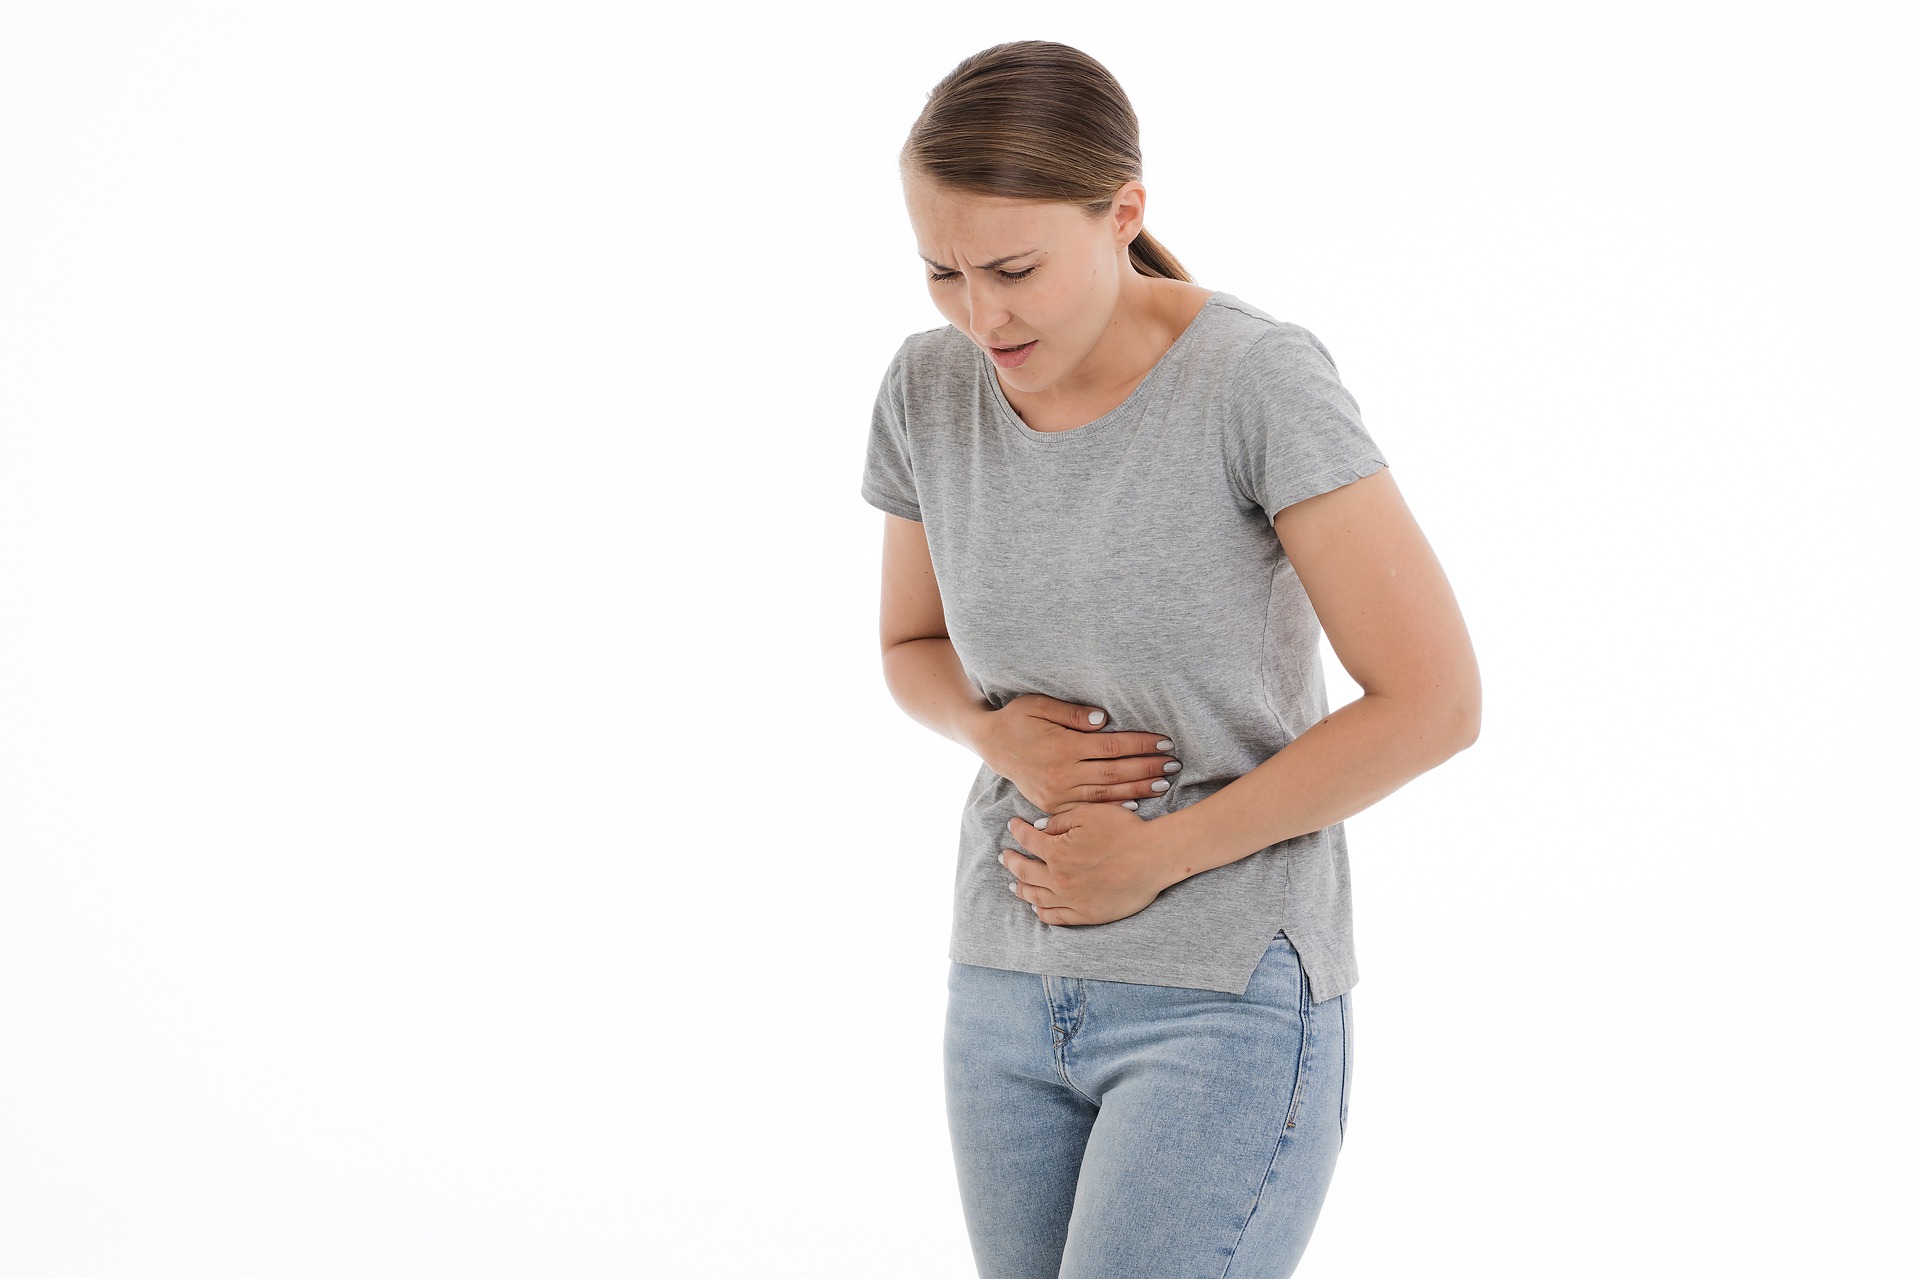 Diverticulosis: What It Is and Why You Should Avoid Alcohol (and Other Food)